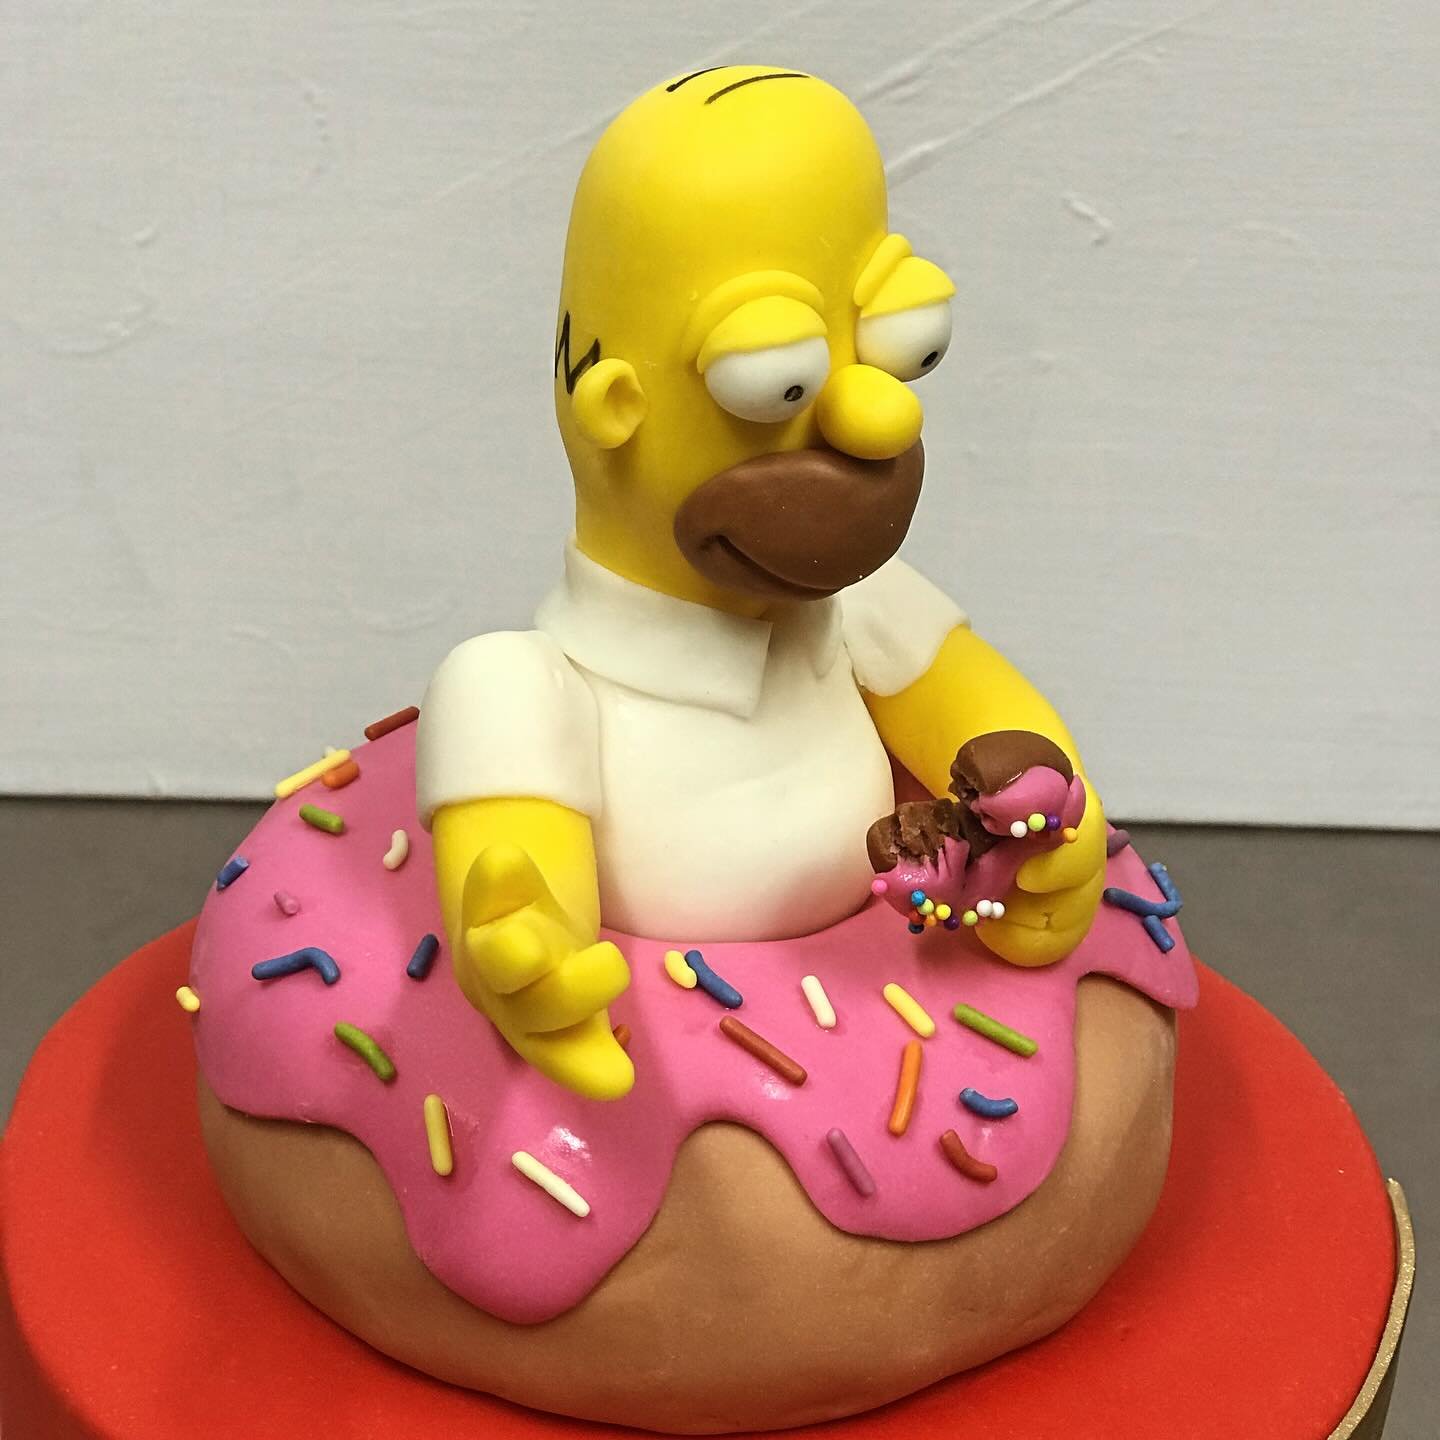 &ldquo;Donuts&hellip;is there anything they can&rsquo;t do?&rdquo; &ndash; Homer Simpson #cakeitecture #bakery #simpsons #homersimpson #auburn #opelika